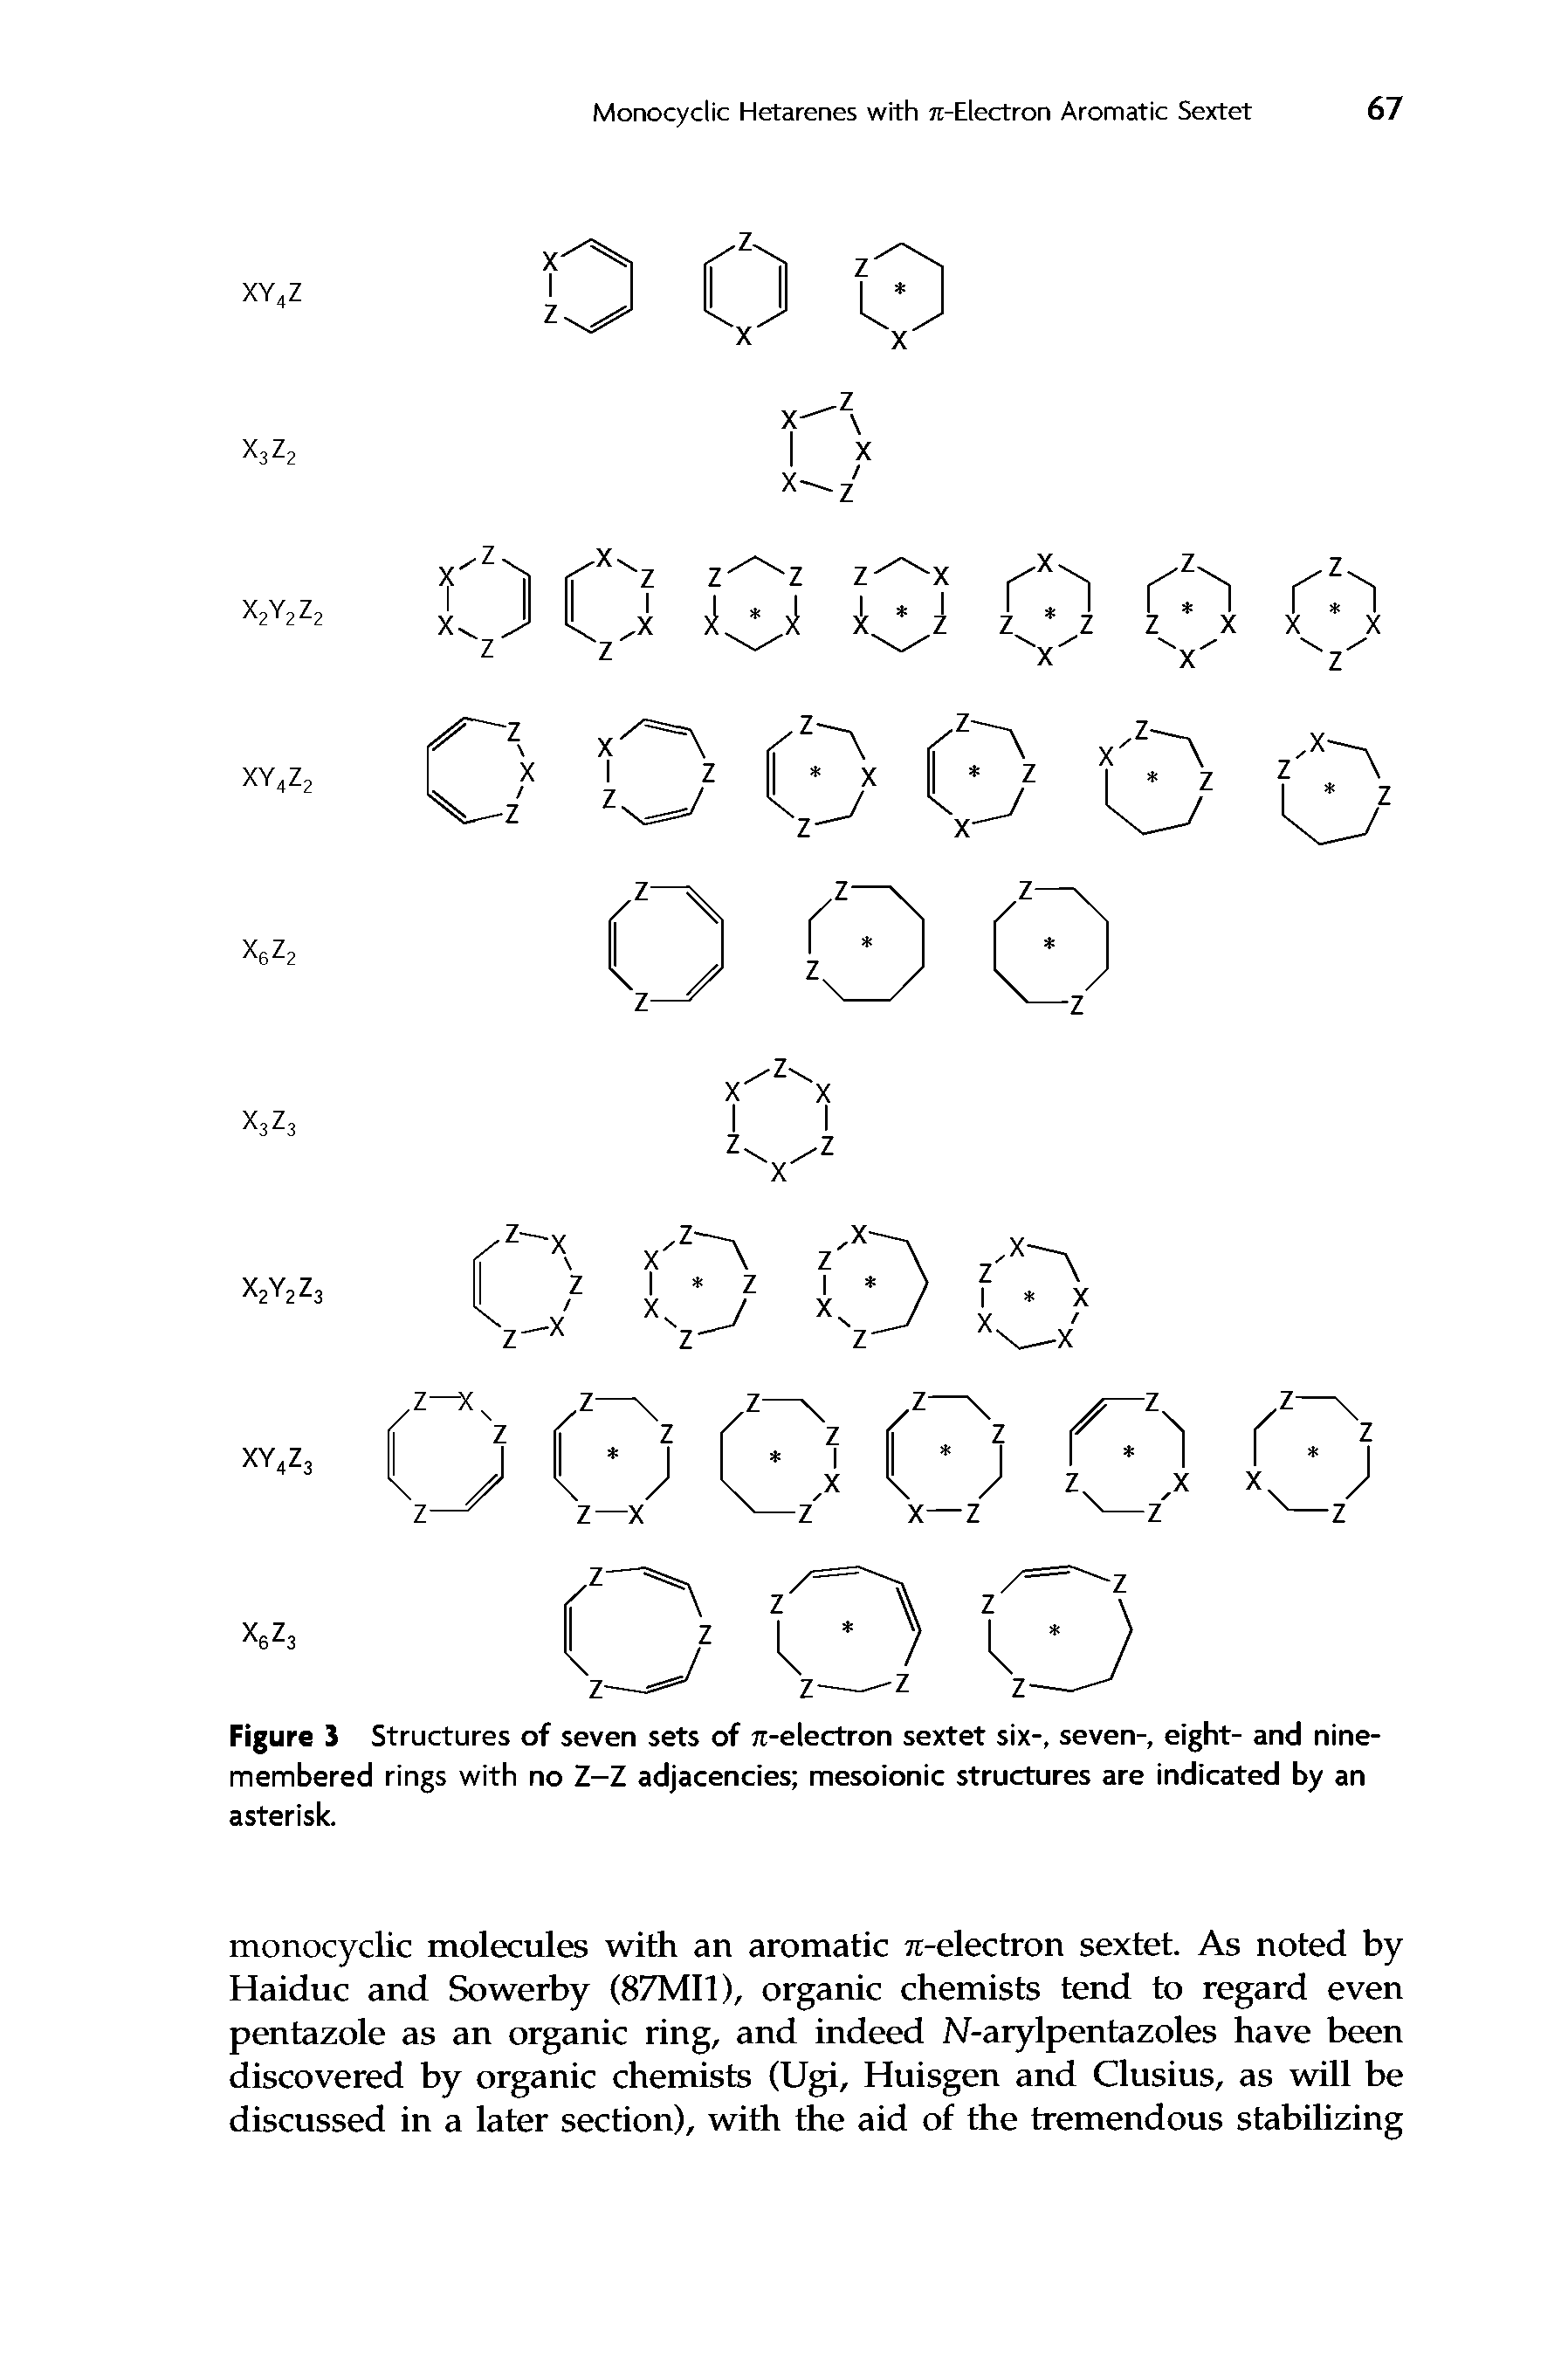 Figure 3 Structures of seven sets of 7t-electron sextet six-, seven-, eight- and nine-membered rings with no Z-Z adjacencies mesoionic structures are indicated by an asterisk.